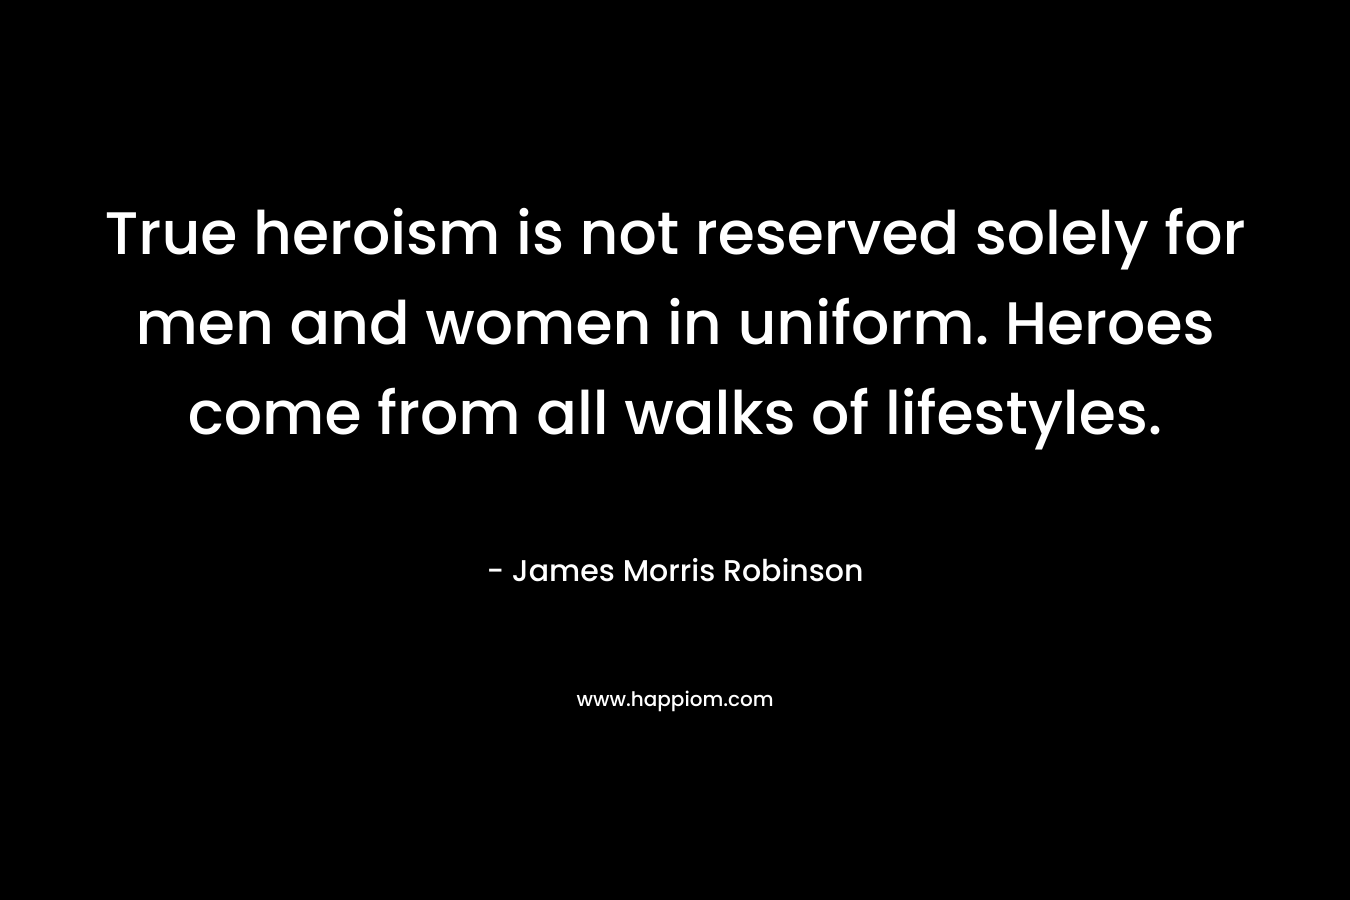 True heroism is not reserved solely for men and women in uniform. Heroes come from all walks of lifestyles. – James Morris Robinson